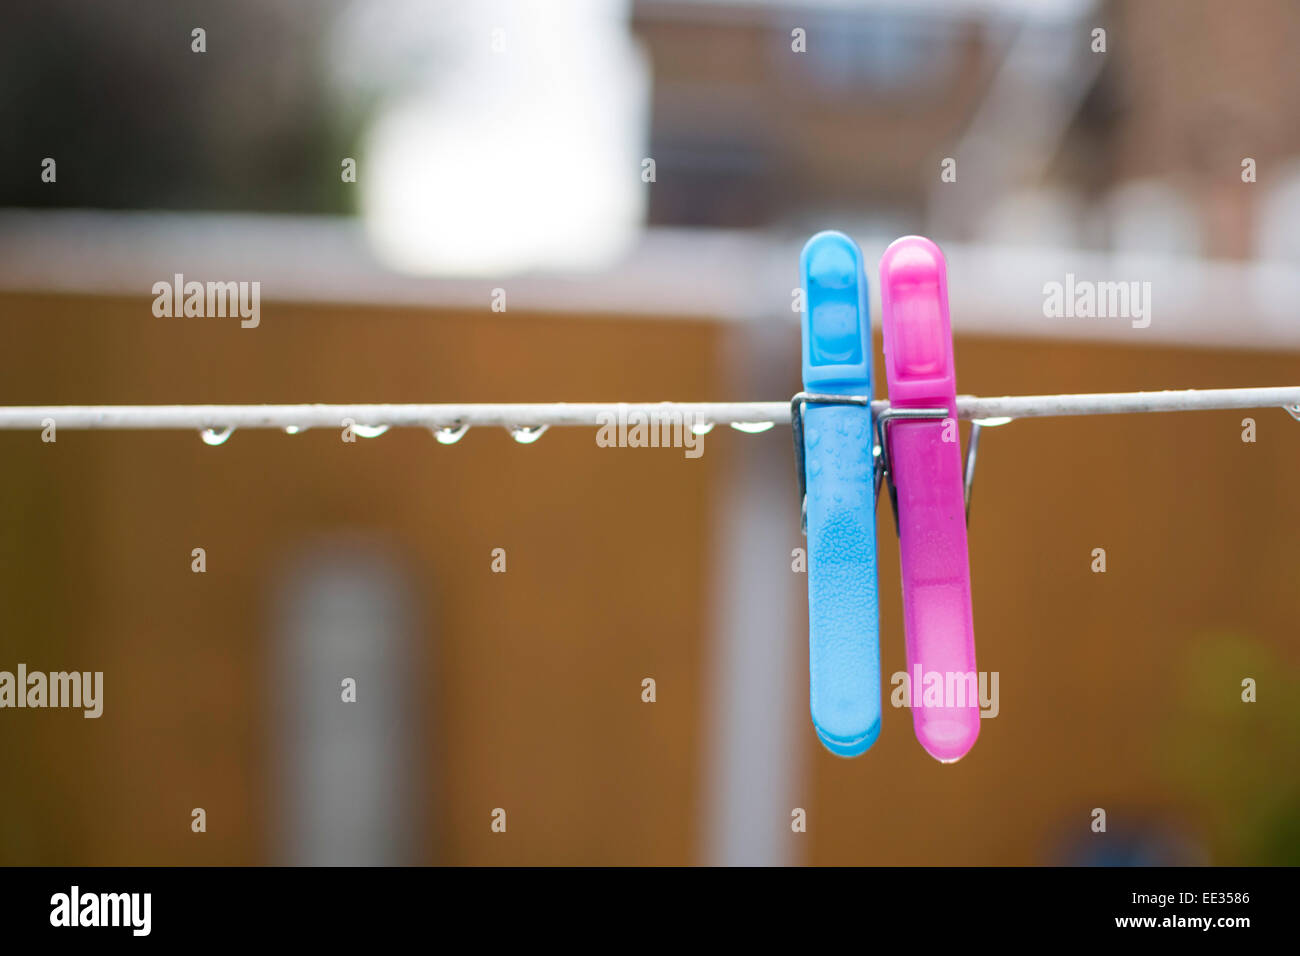 Two pegs on a washing line Stock Photo